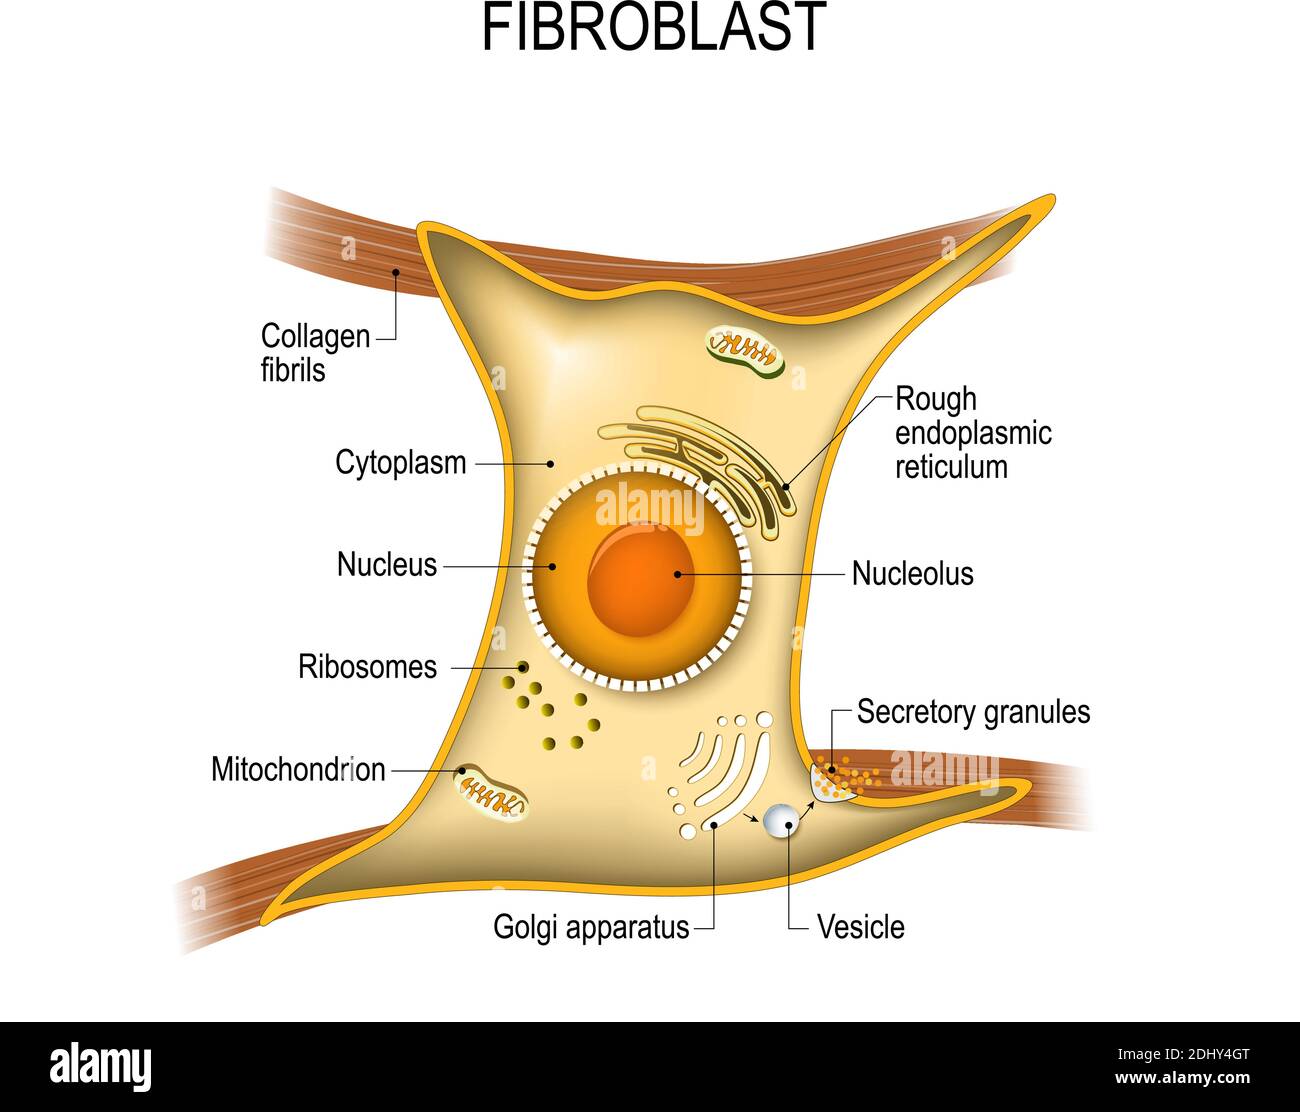 Fibroblast is a dermis cell (vital to the skin's strength and elasticity). Structure of Fibroblast cell. Stock Vector